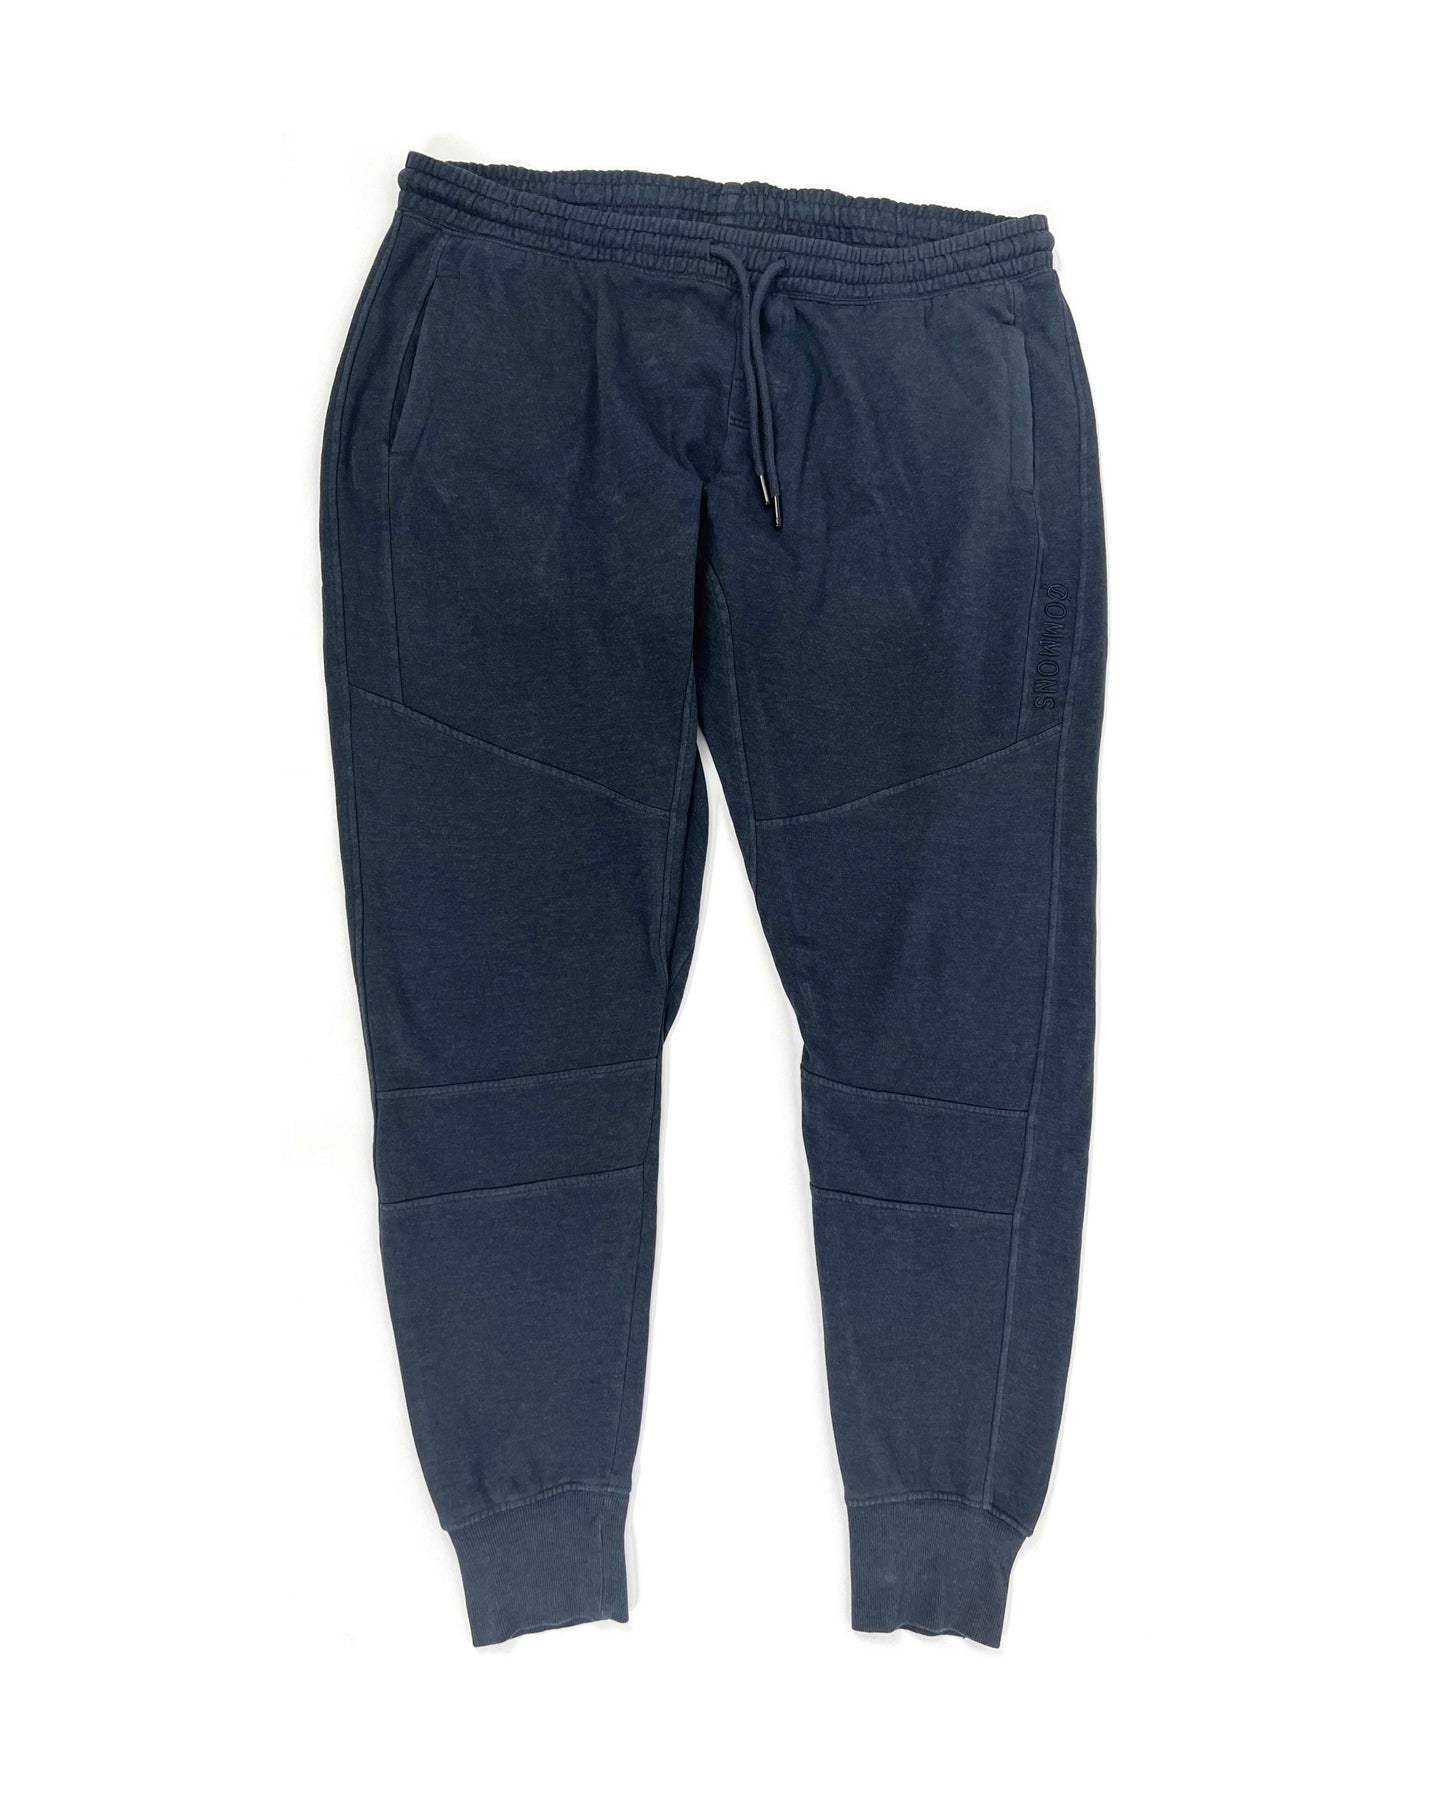 CMNS jogger pants in washed navy